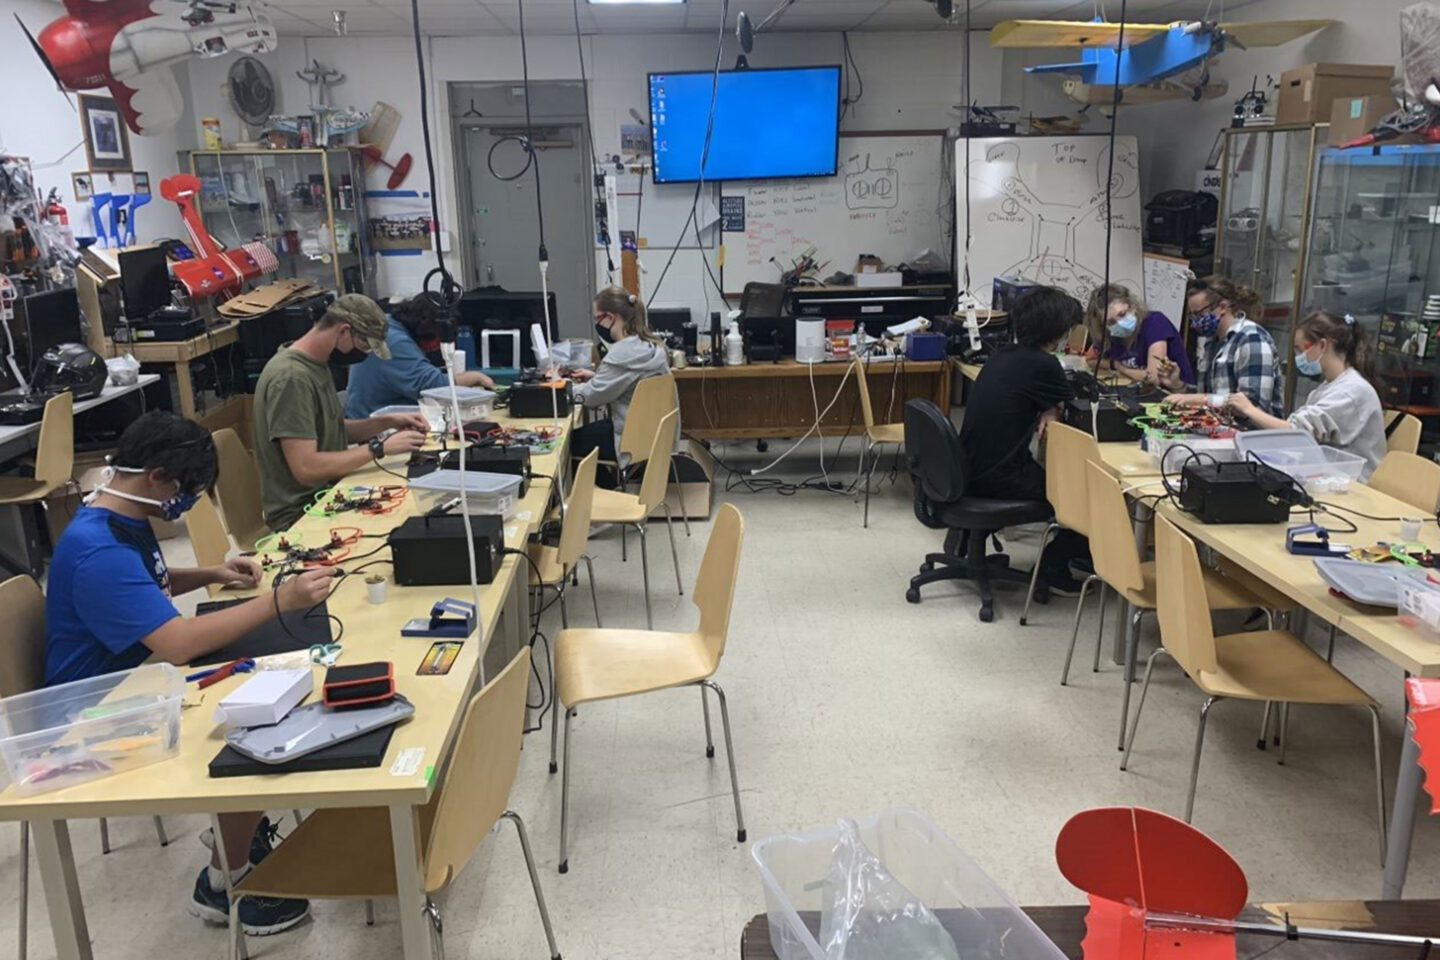 Drone students working in a classroom